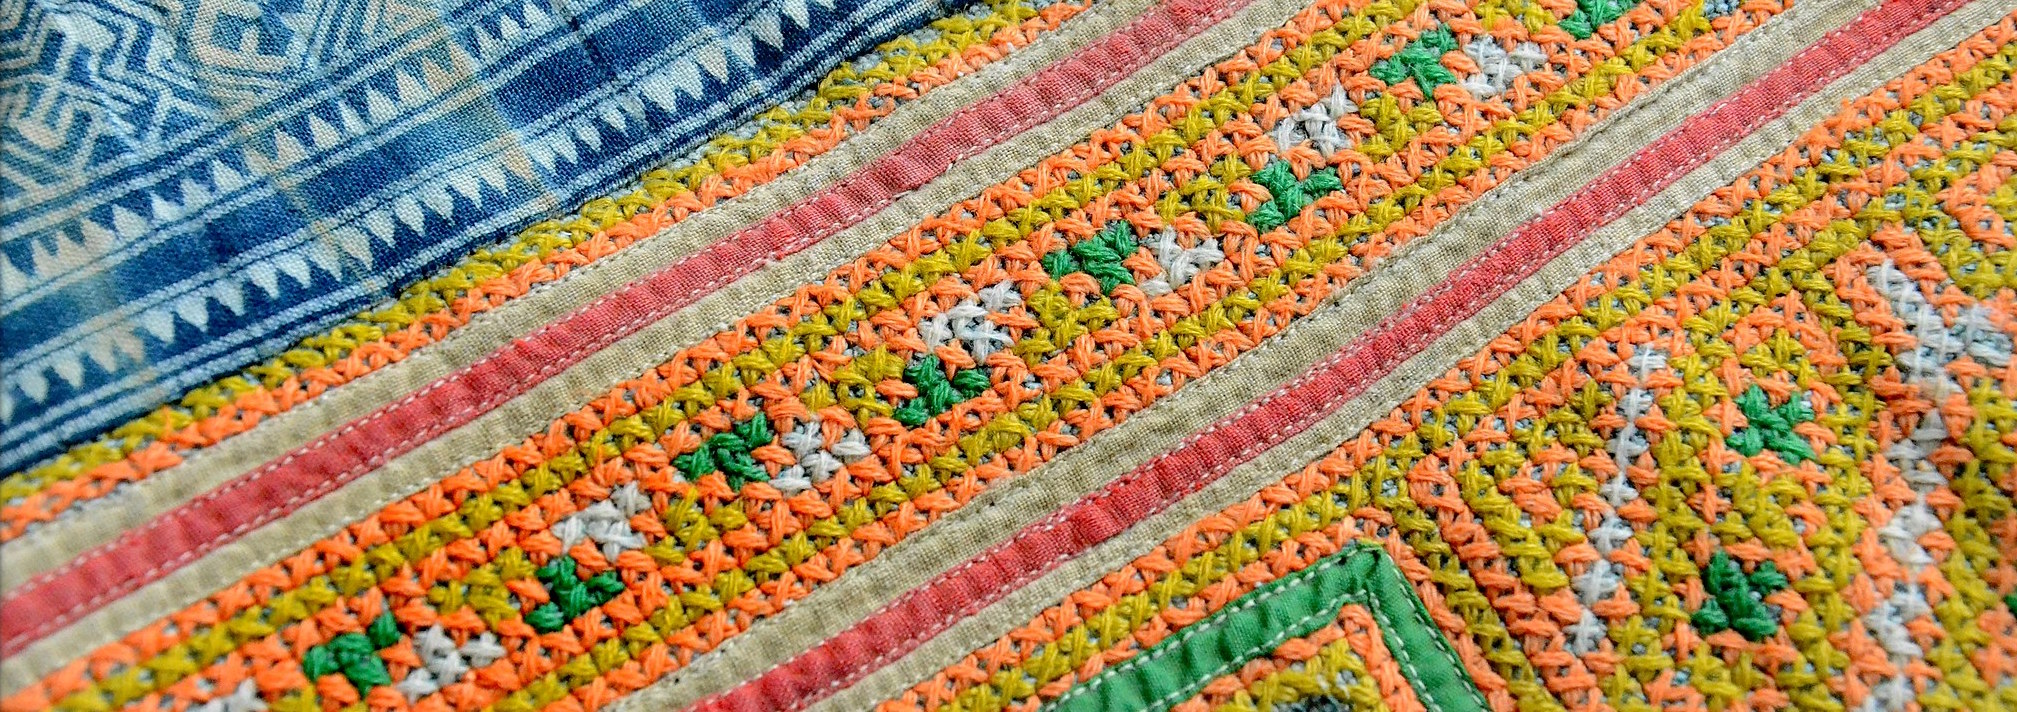 A detail of a section of Hmong embroidery showing cross-stitch pattern, batik, applique work